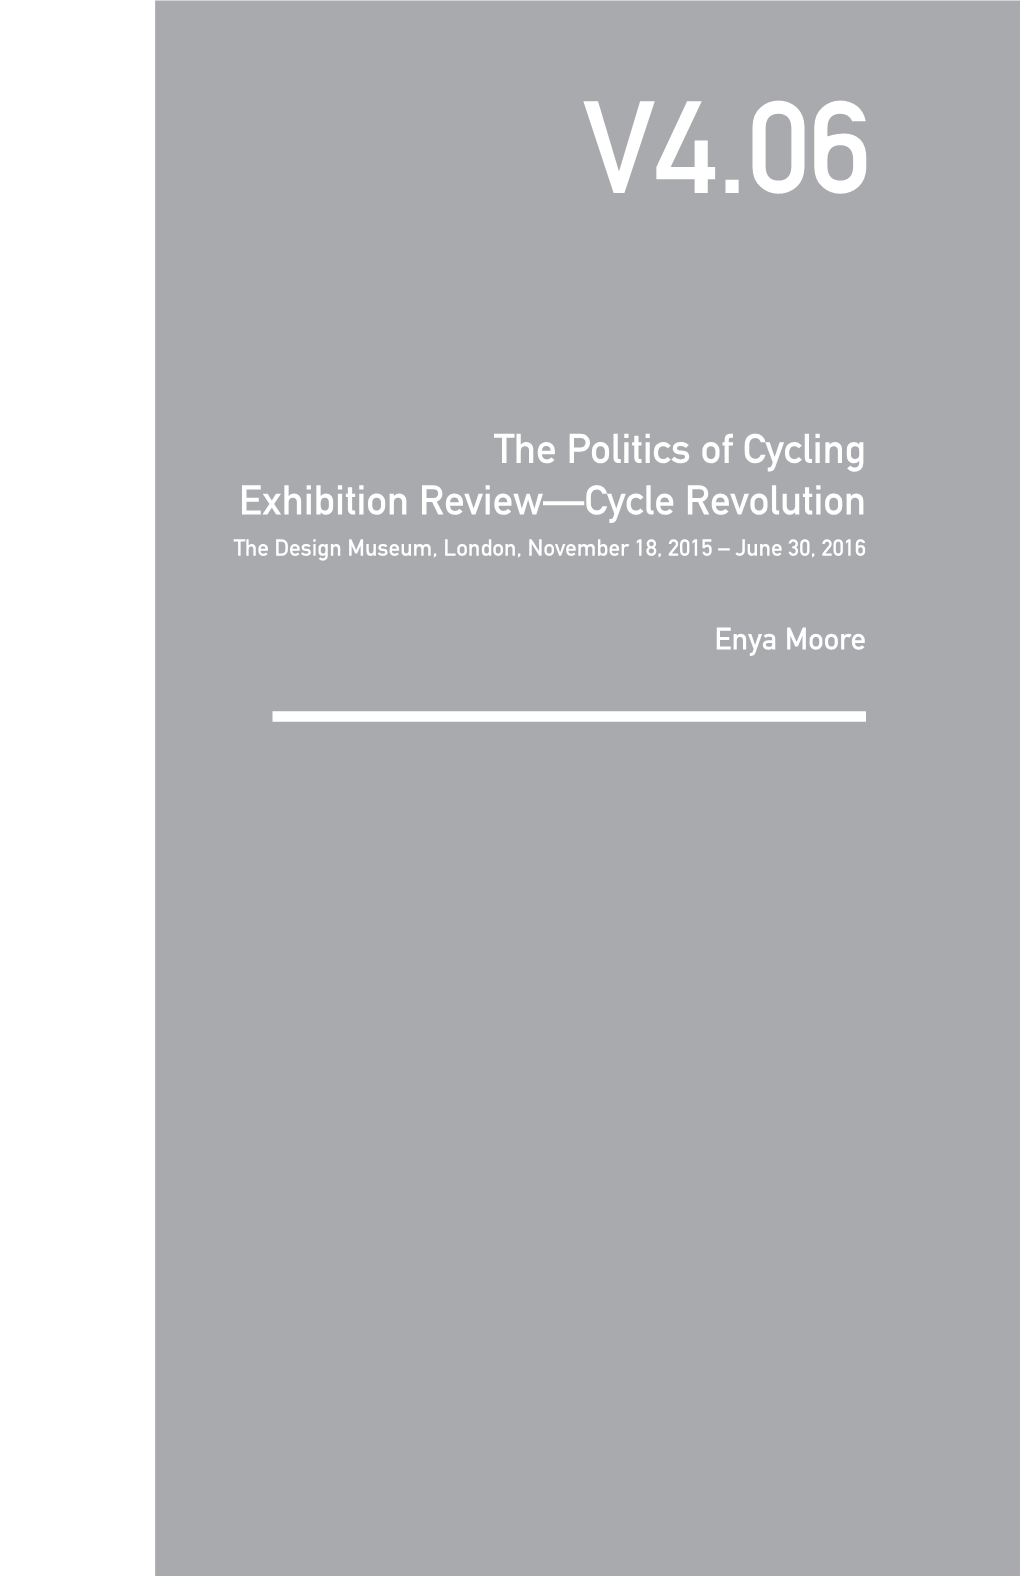 The Politics of Cycling Exhibition Review—Cycle Revolution the Design Museum, London, November 18, 2015 – June 30, 2016